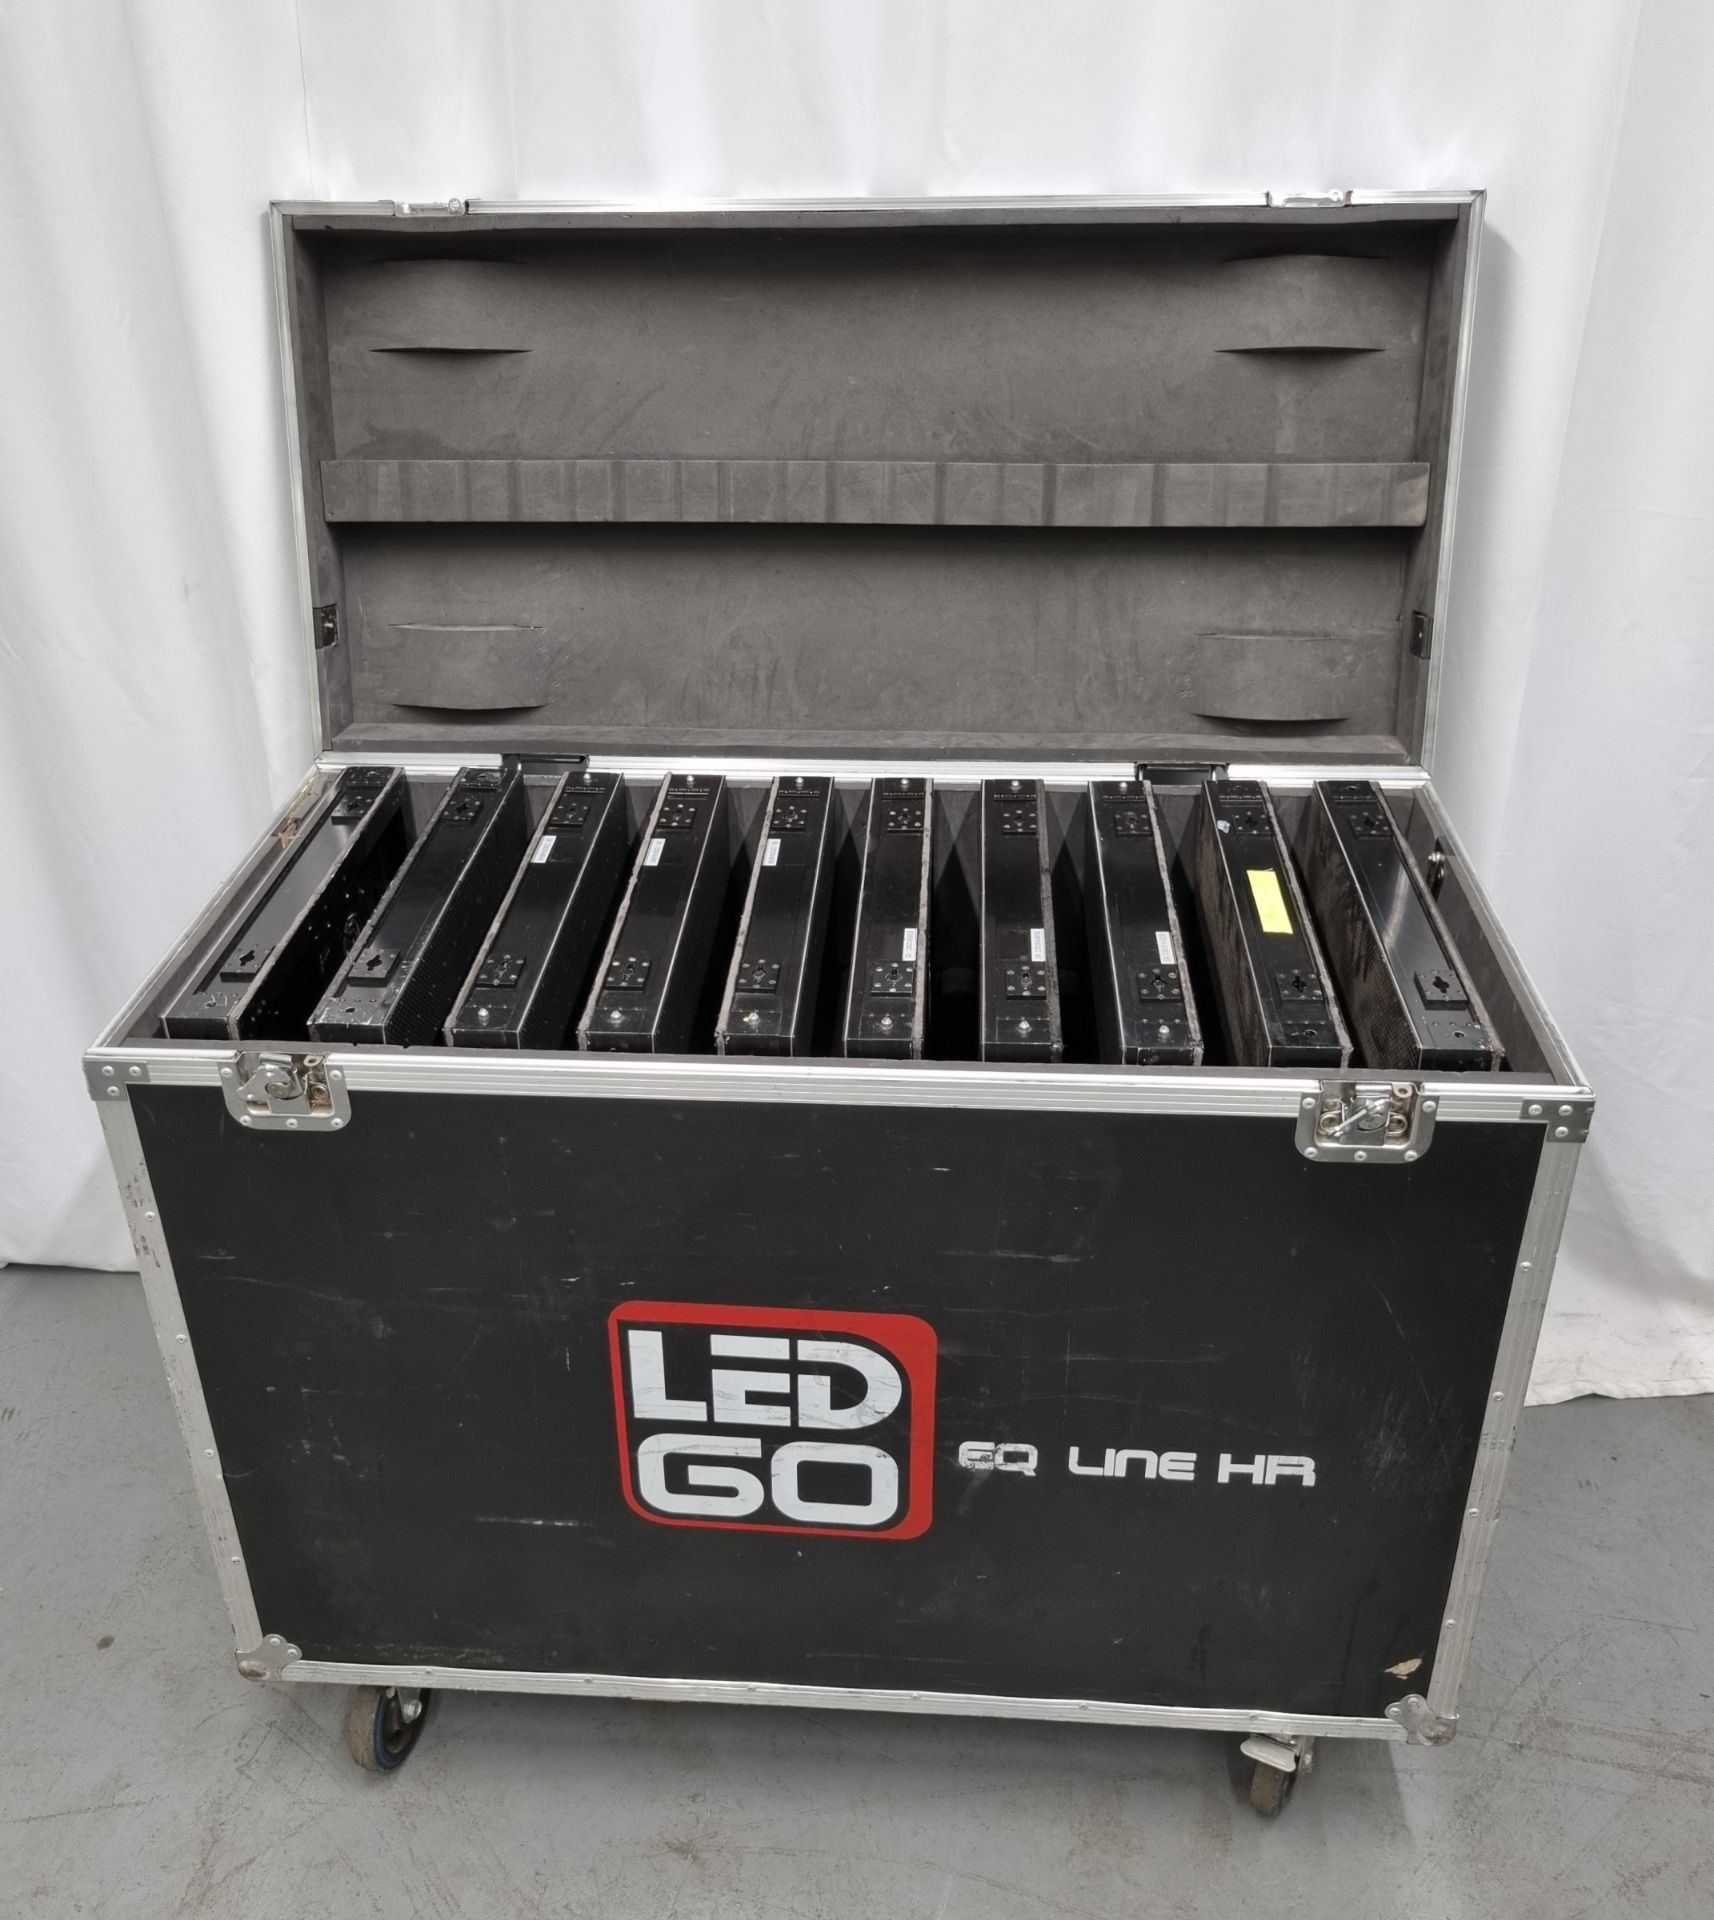 3x flight cases of LED GO 6mm EQ line video wall - 20x panels included - case sizes - W 1180 x D 555 - Image 7 of 12